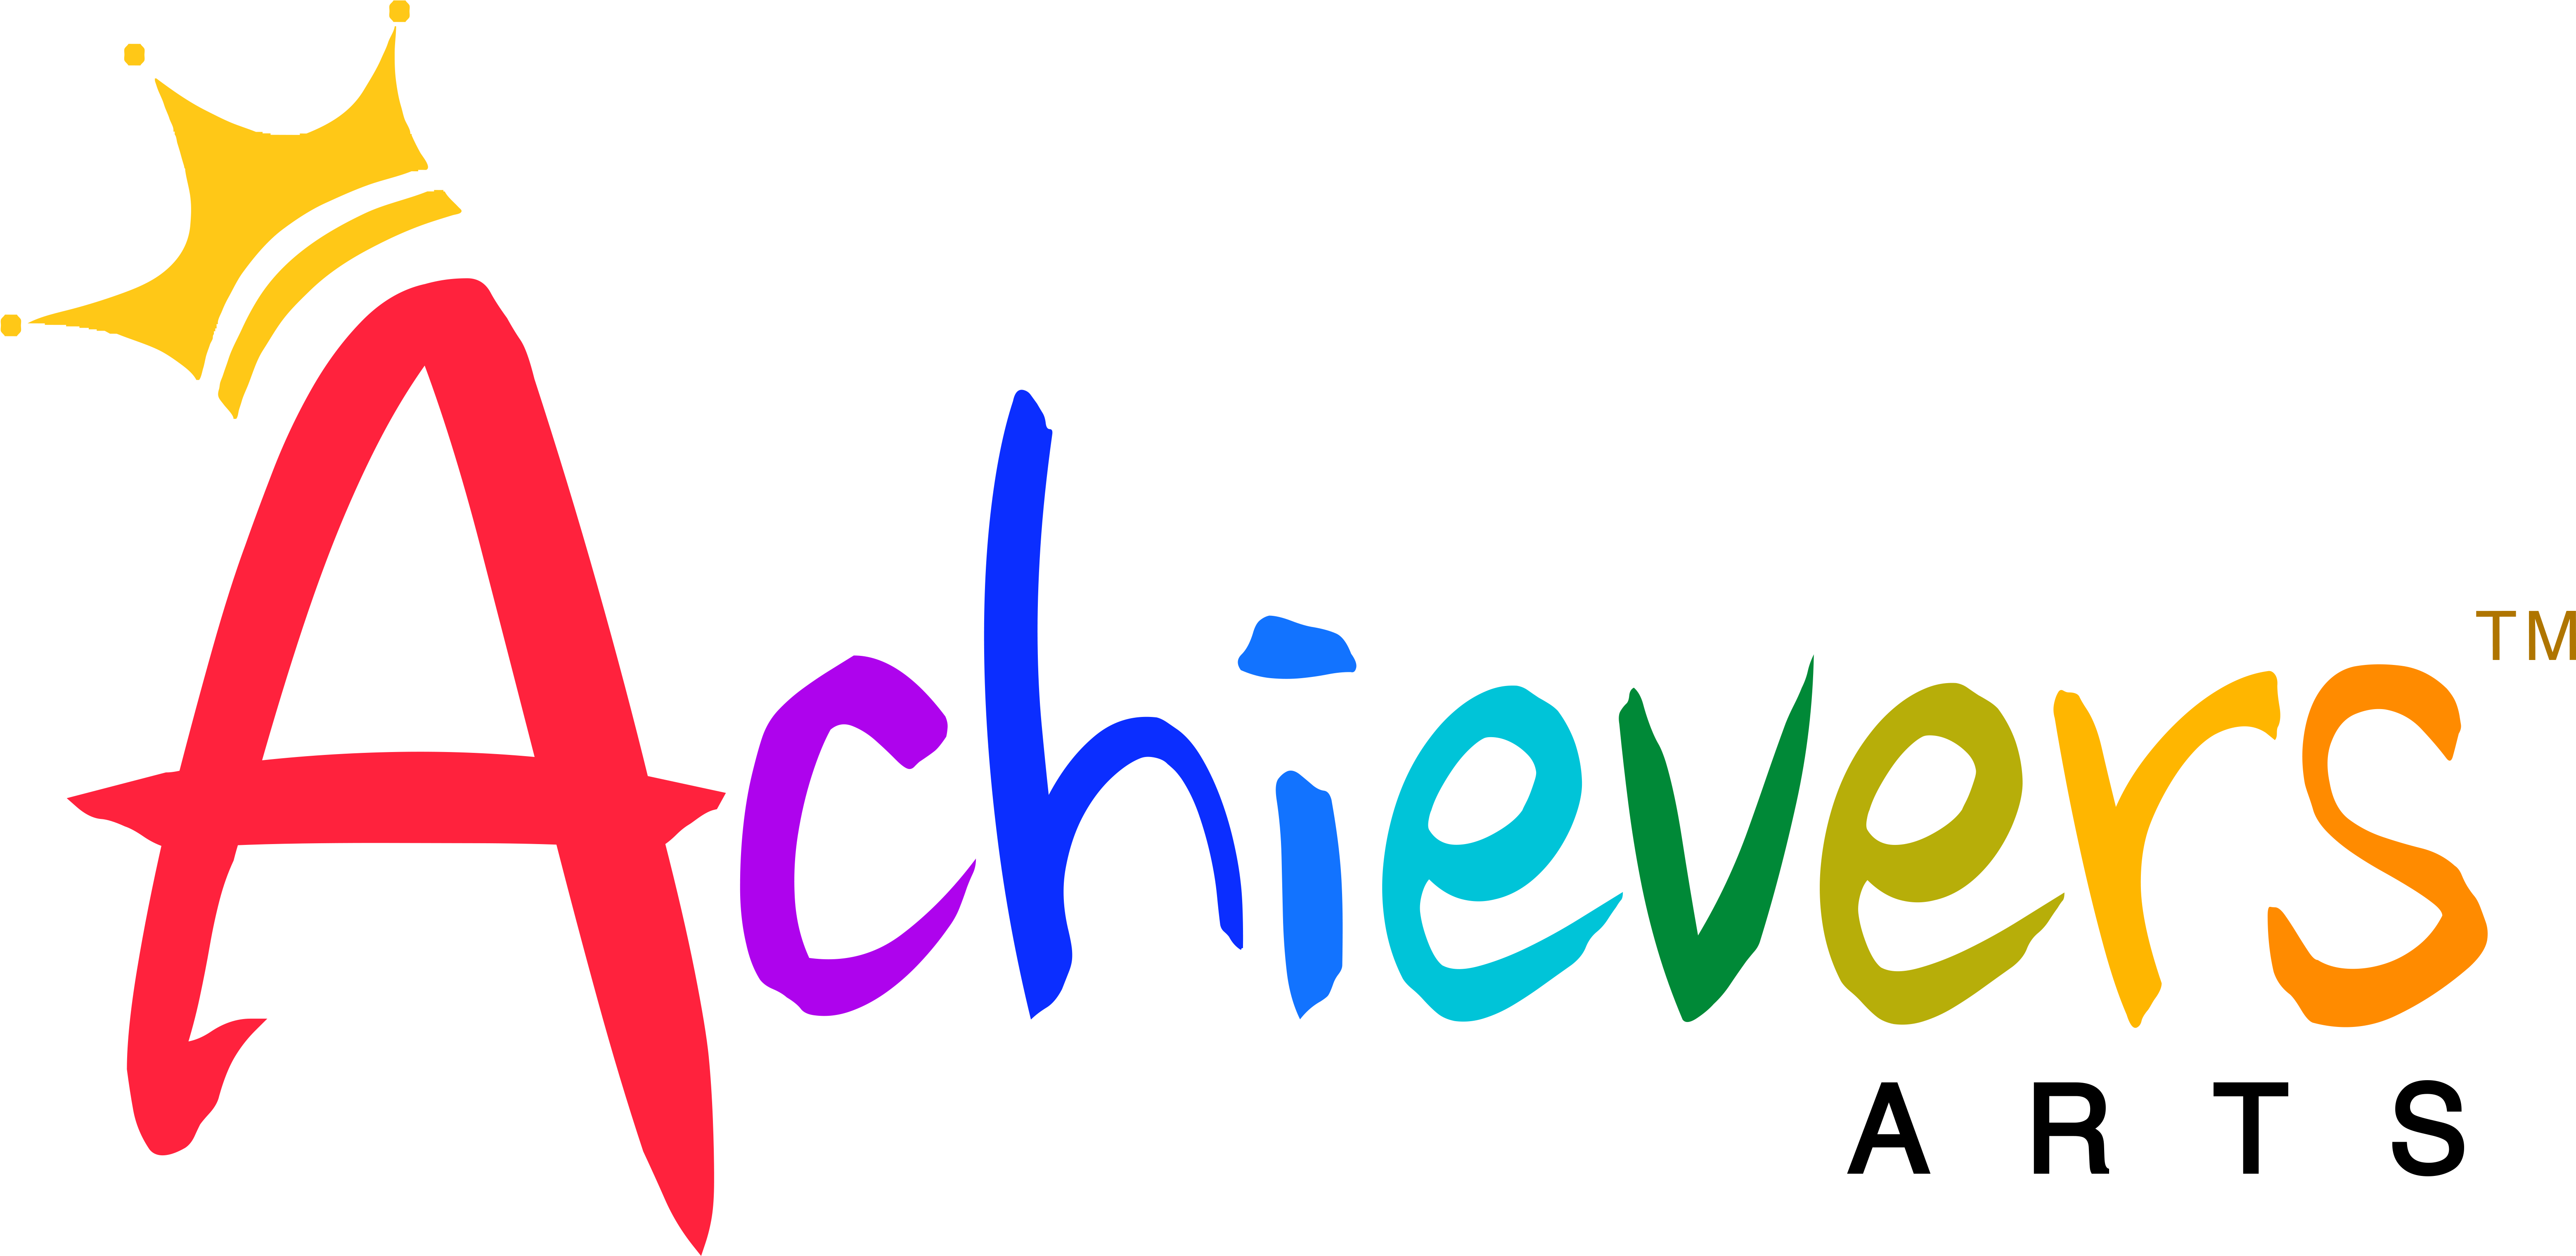 Achievers Png (6376x3580)